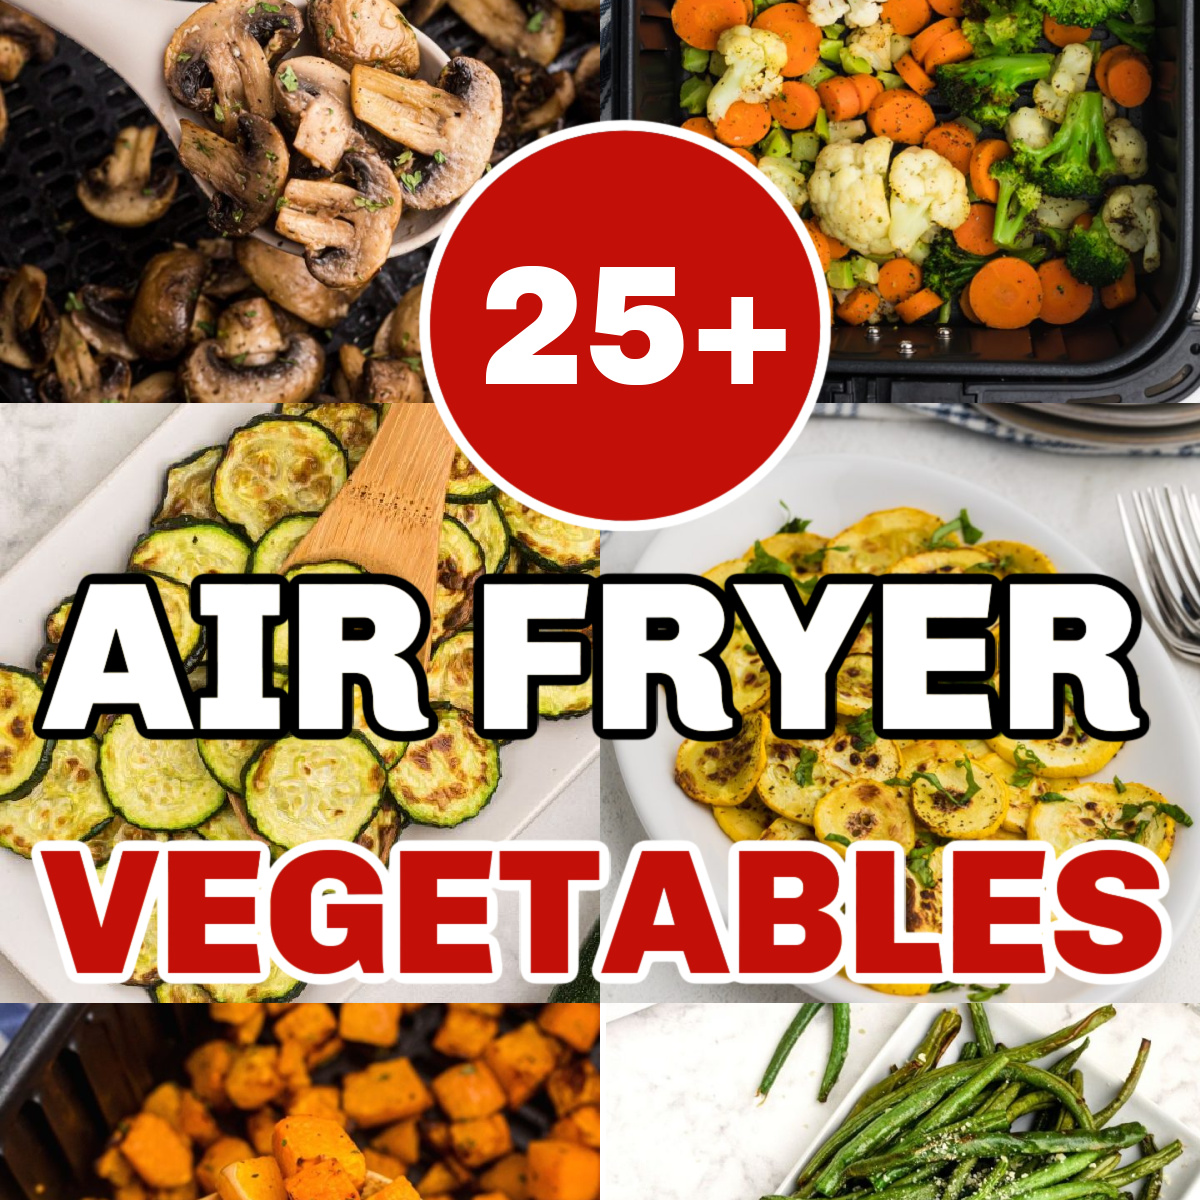 25+ Air Fryer Vegetable Recipes with wording overlay.